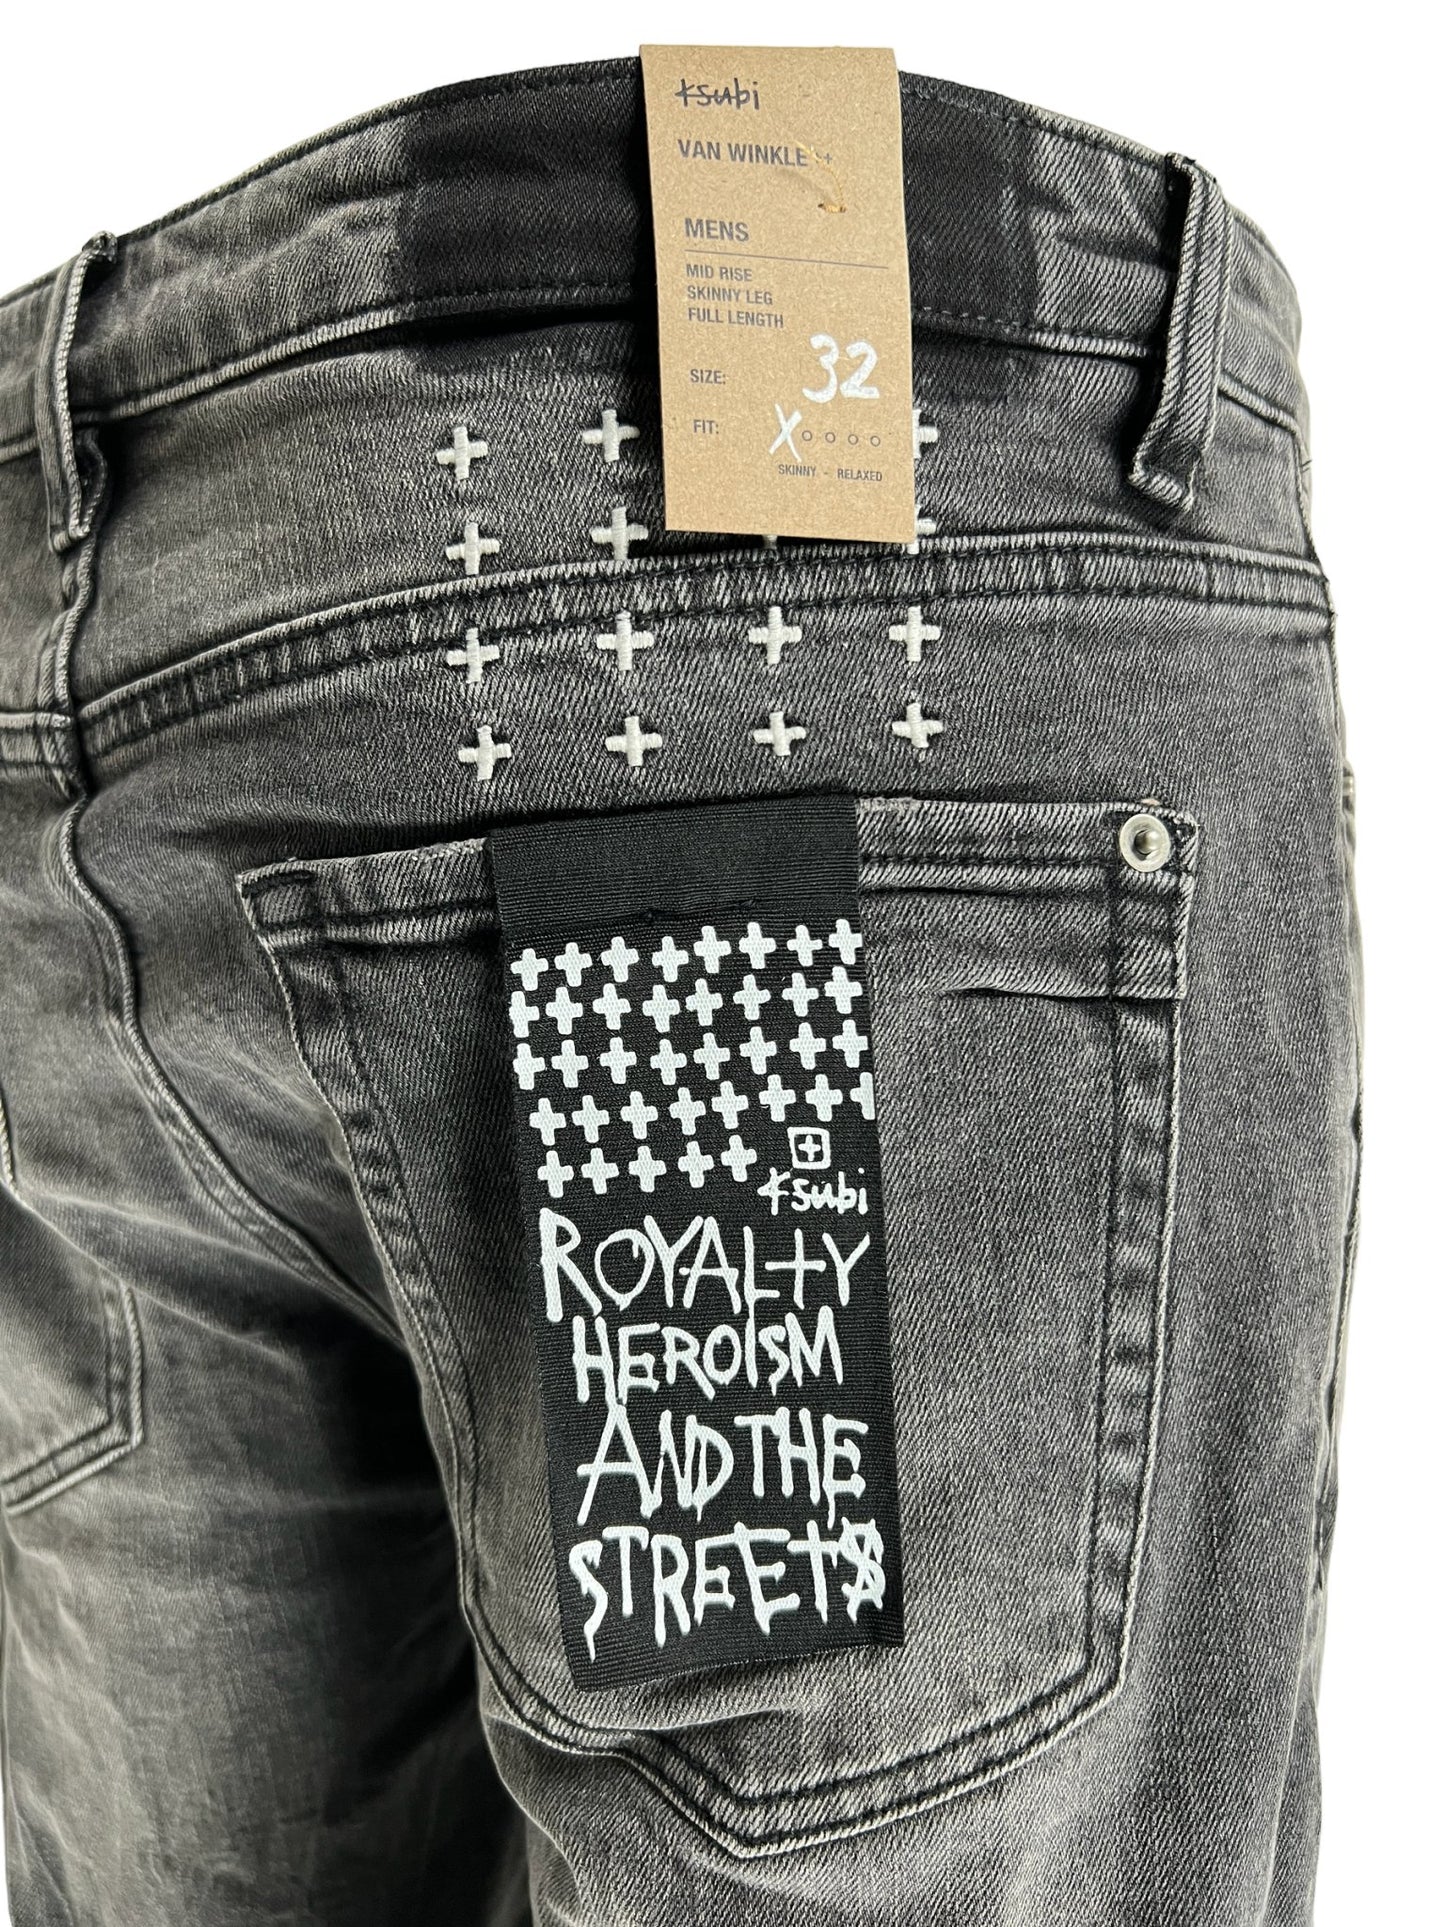 A pair of black skinny jeans with a tag that says KSUBI VAN WINKLE CHAMBER BLACK.